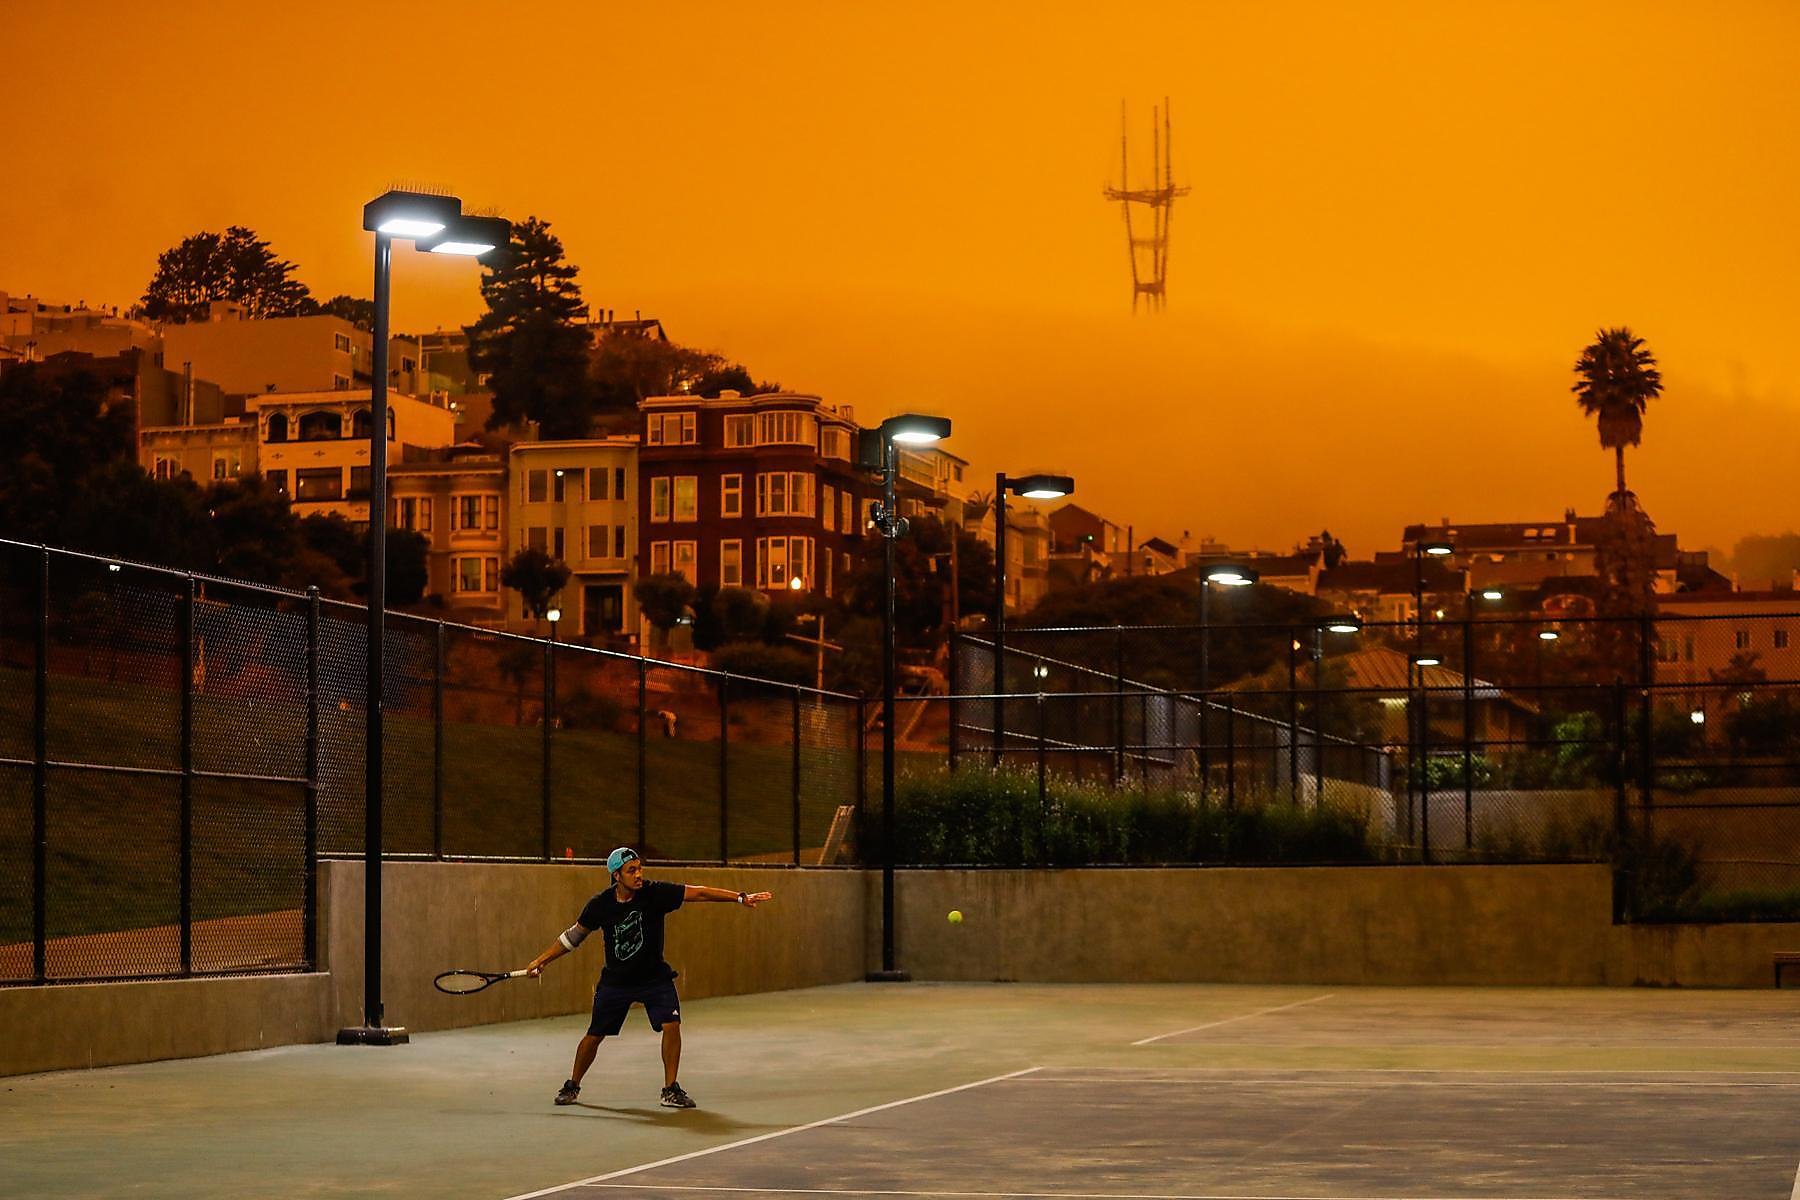 BREAKING NEWS : LA County Health Agency approves Tennis Doubles Play with social distancing in effect amid unhealthy air quality dangers